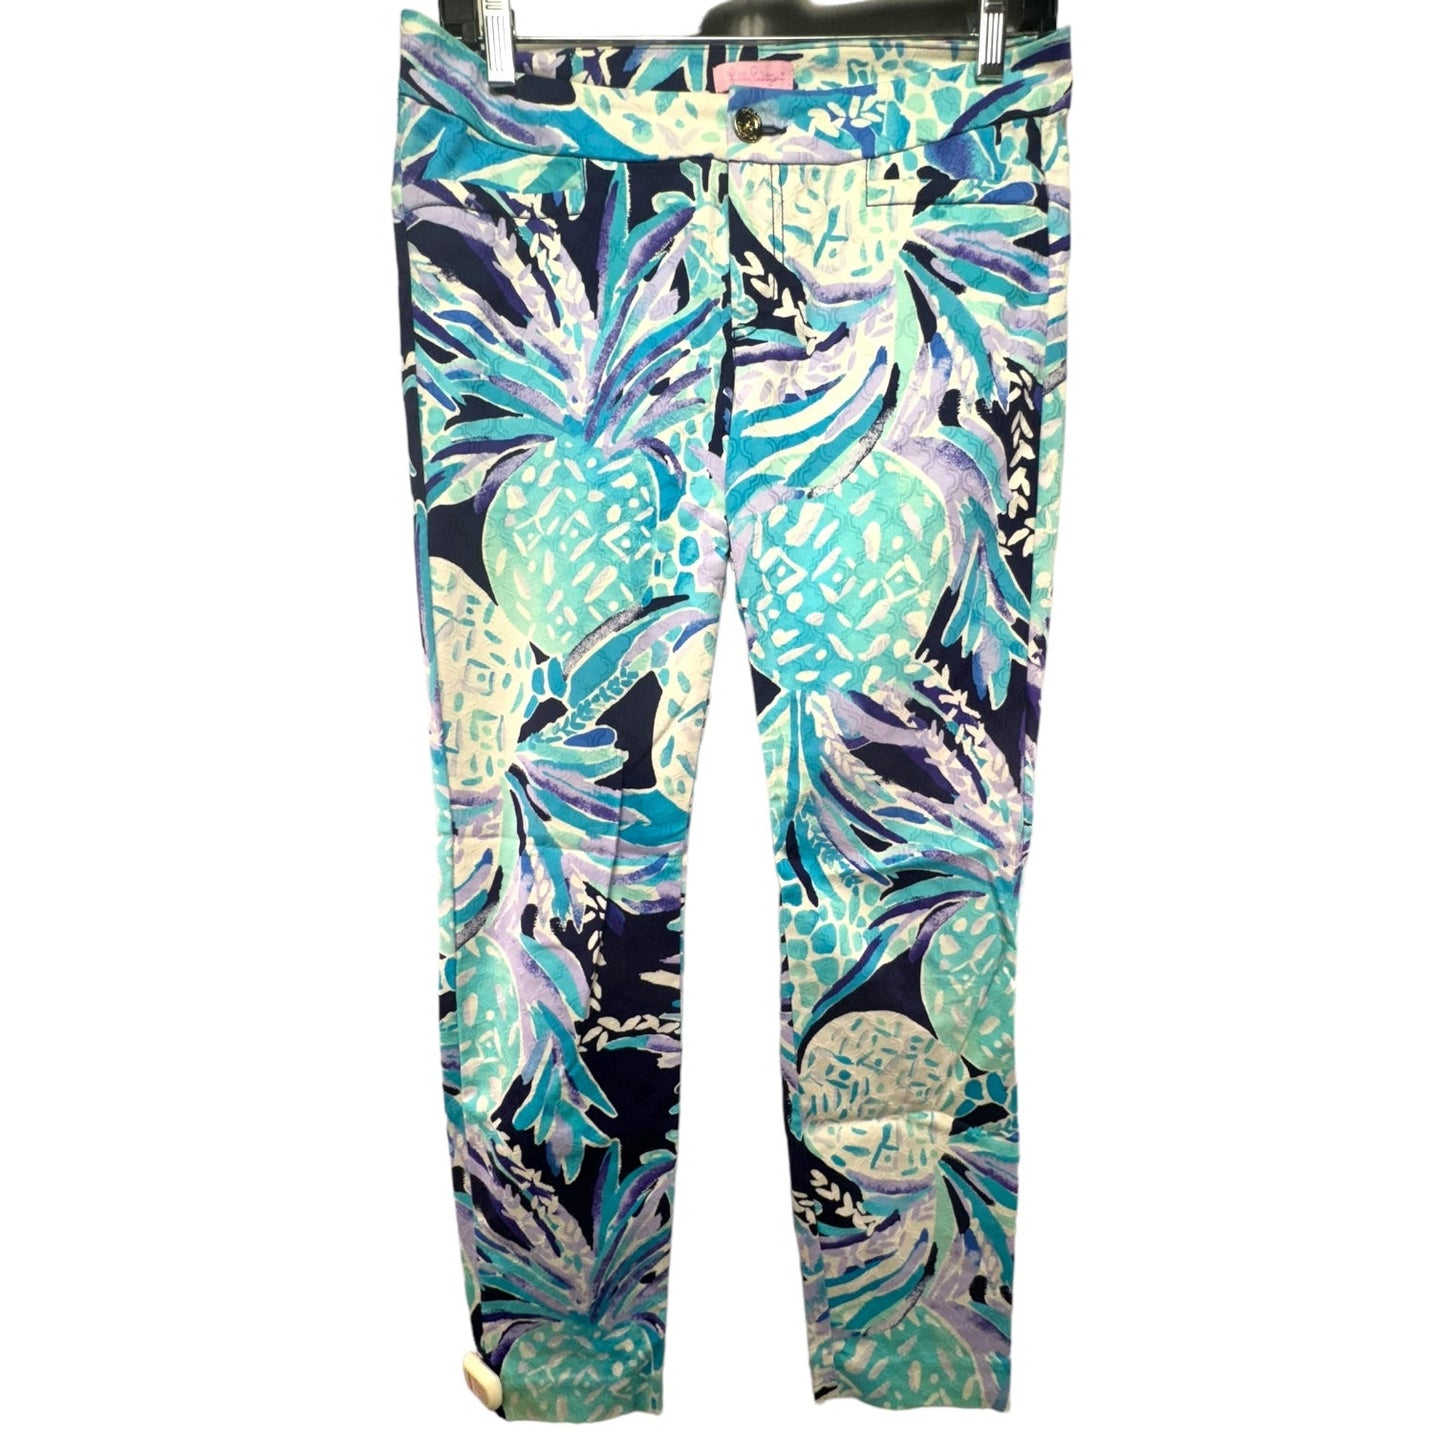 Kelly Skinny Ankle Pants  - Alotta Colada By Lilly Pulitzer  Size: 2